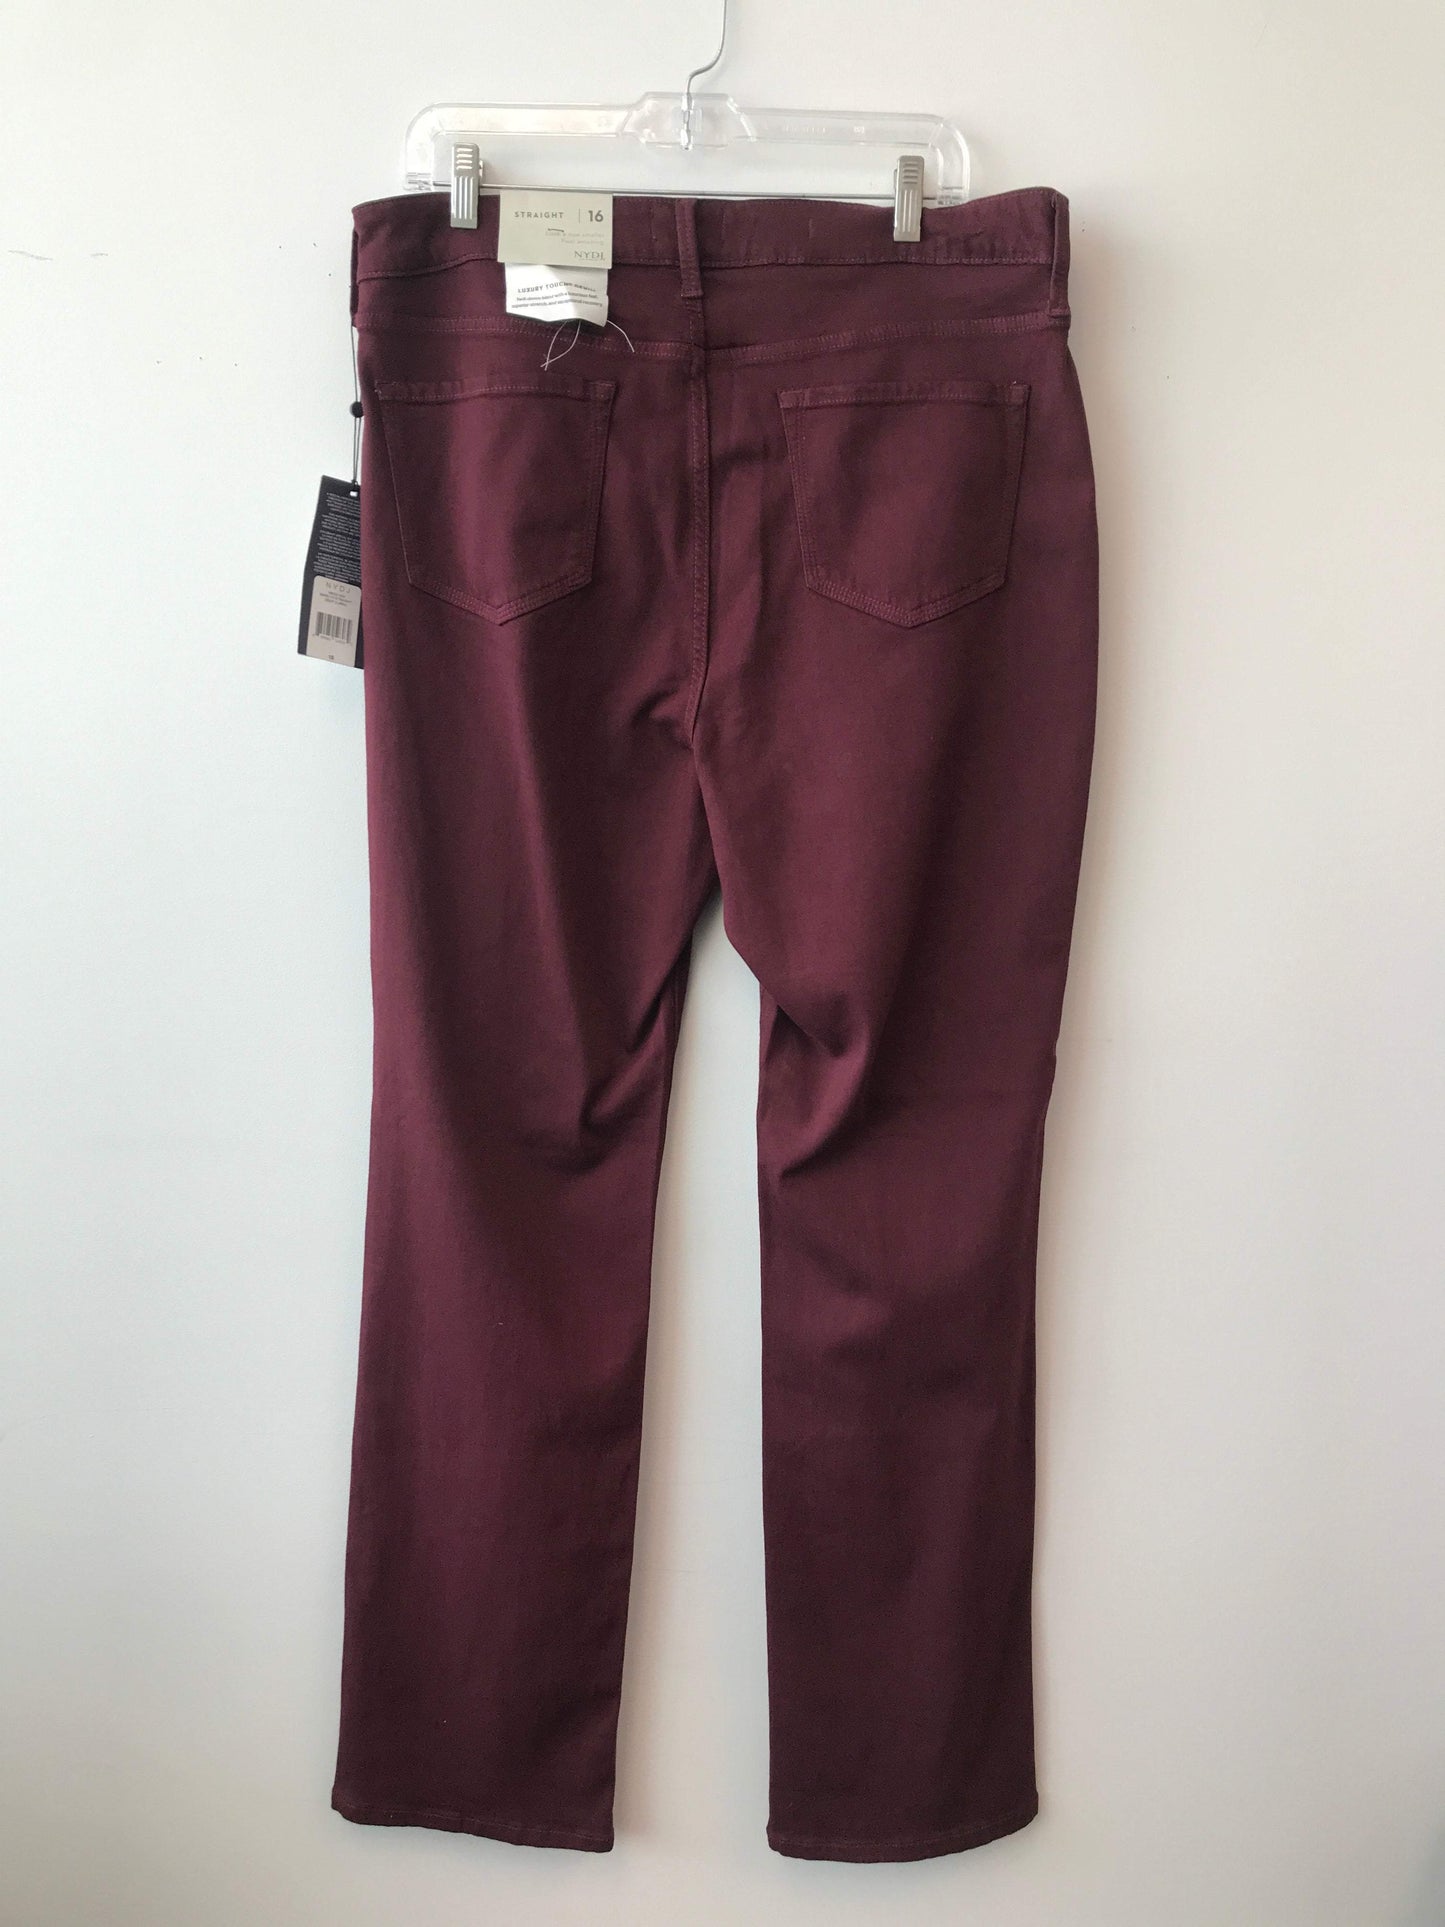 Not Your Daughter's Jeans Size 16 Cotton/Viscose Blend Burgundy Jeans NWT